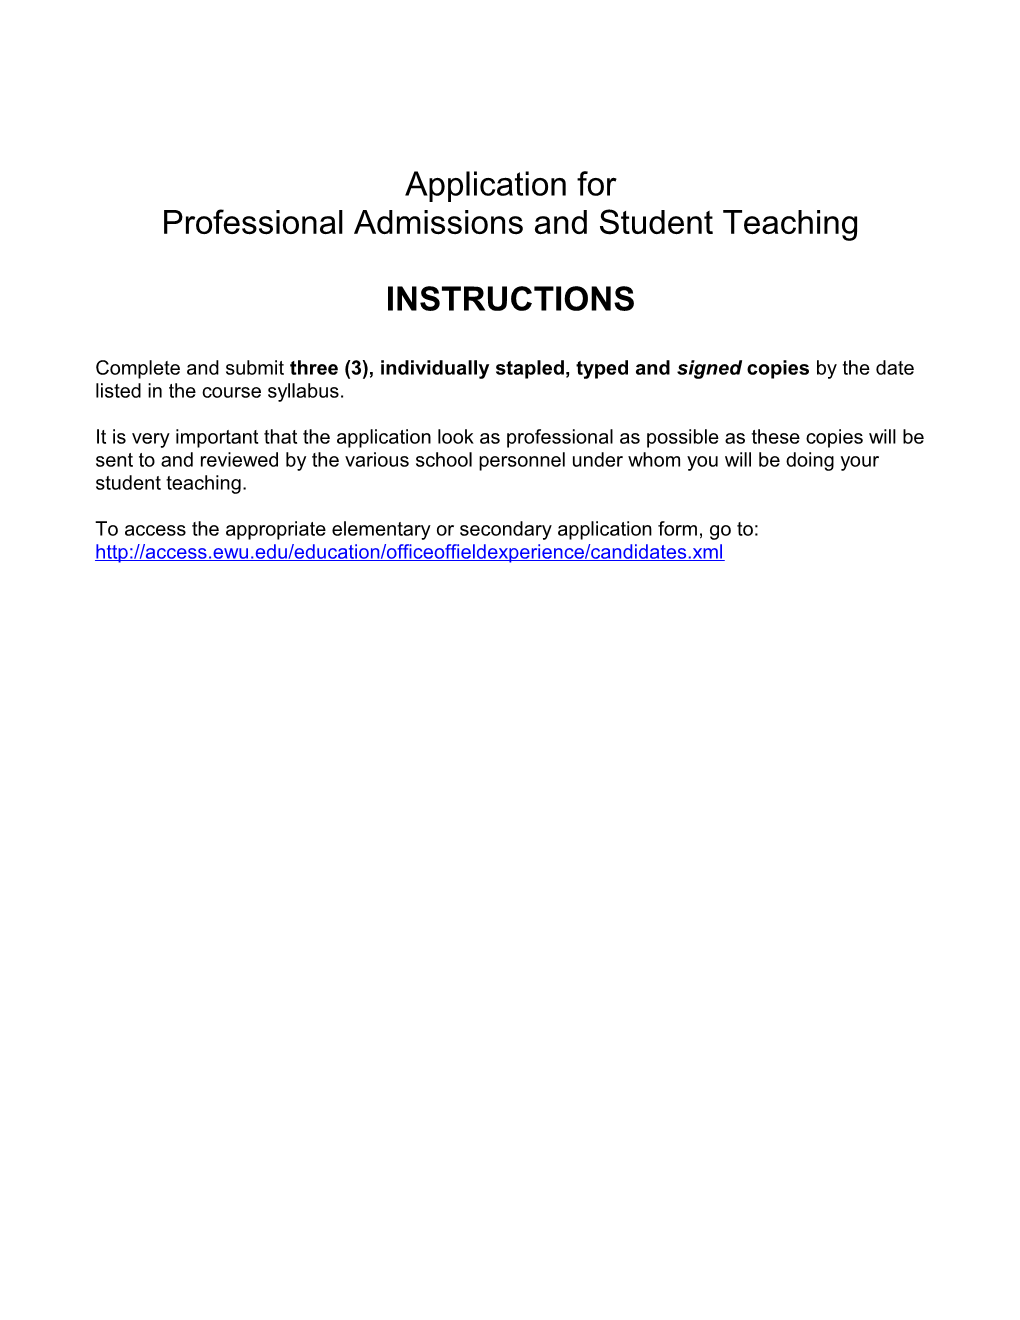 Professional Admissions and Student Teaching